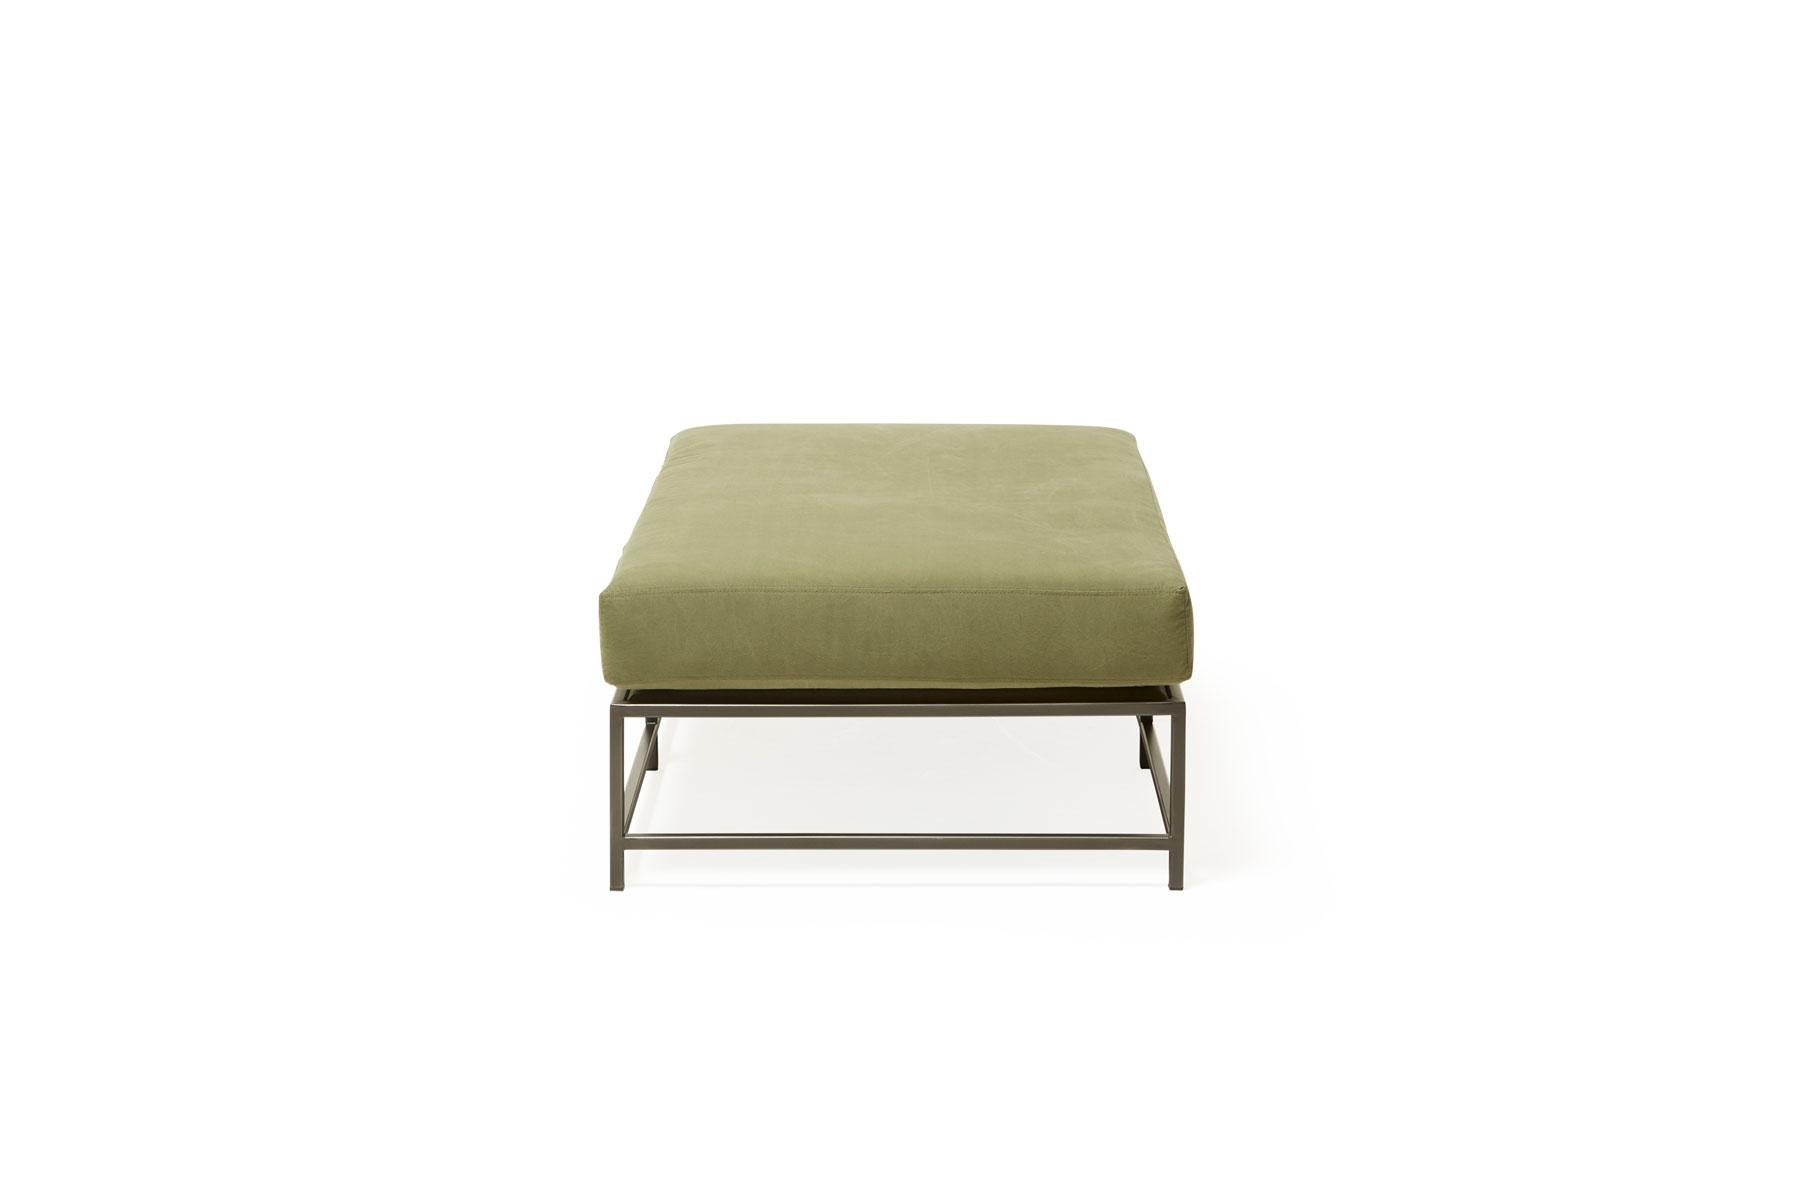 American Olive Canvas and Blackened Steel Bench For Sale